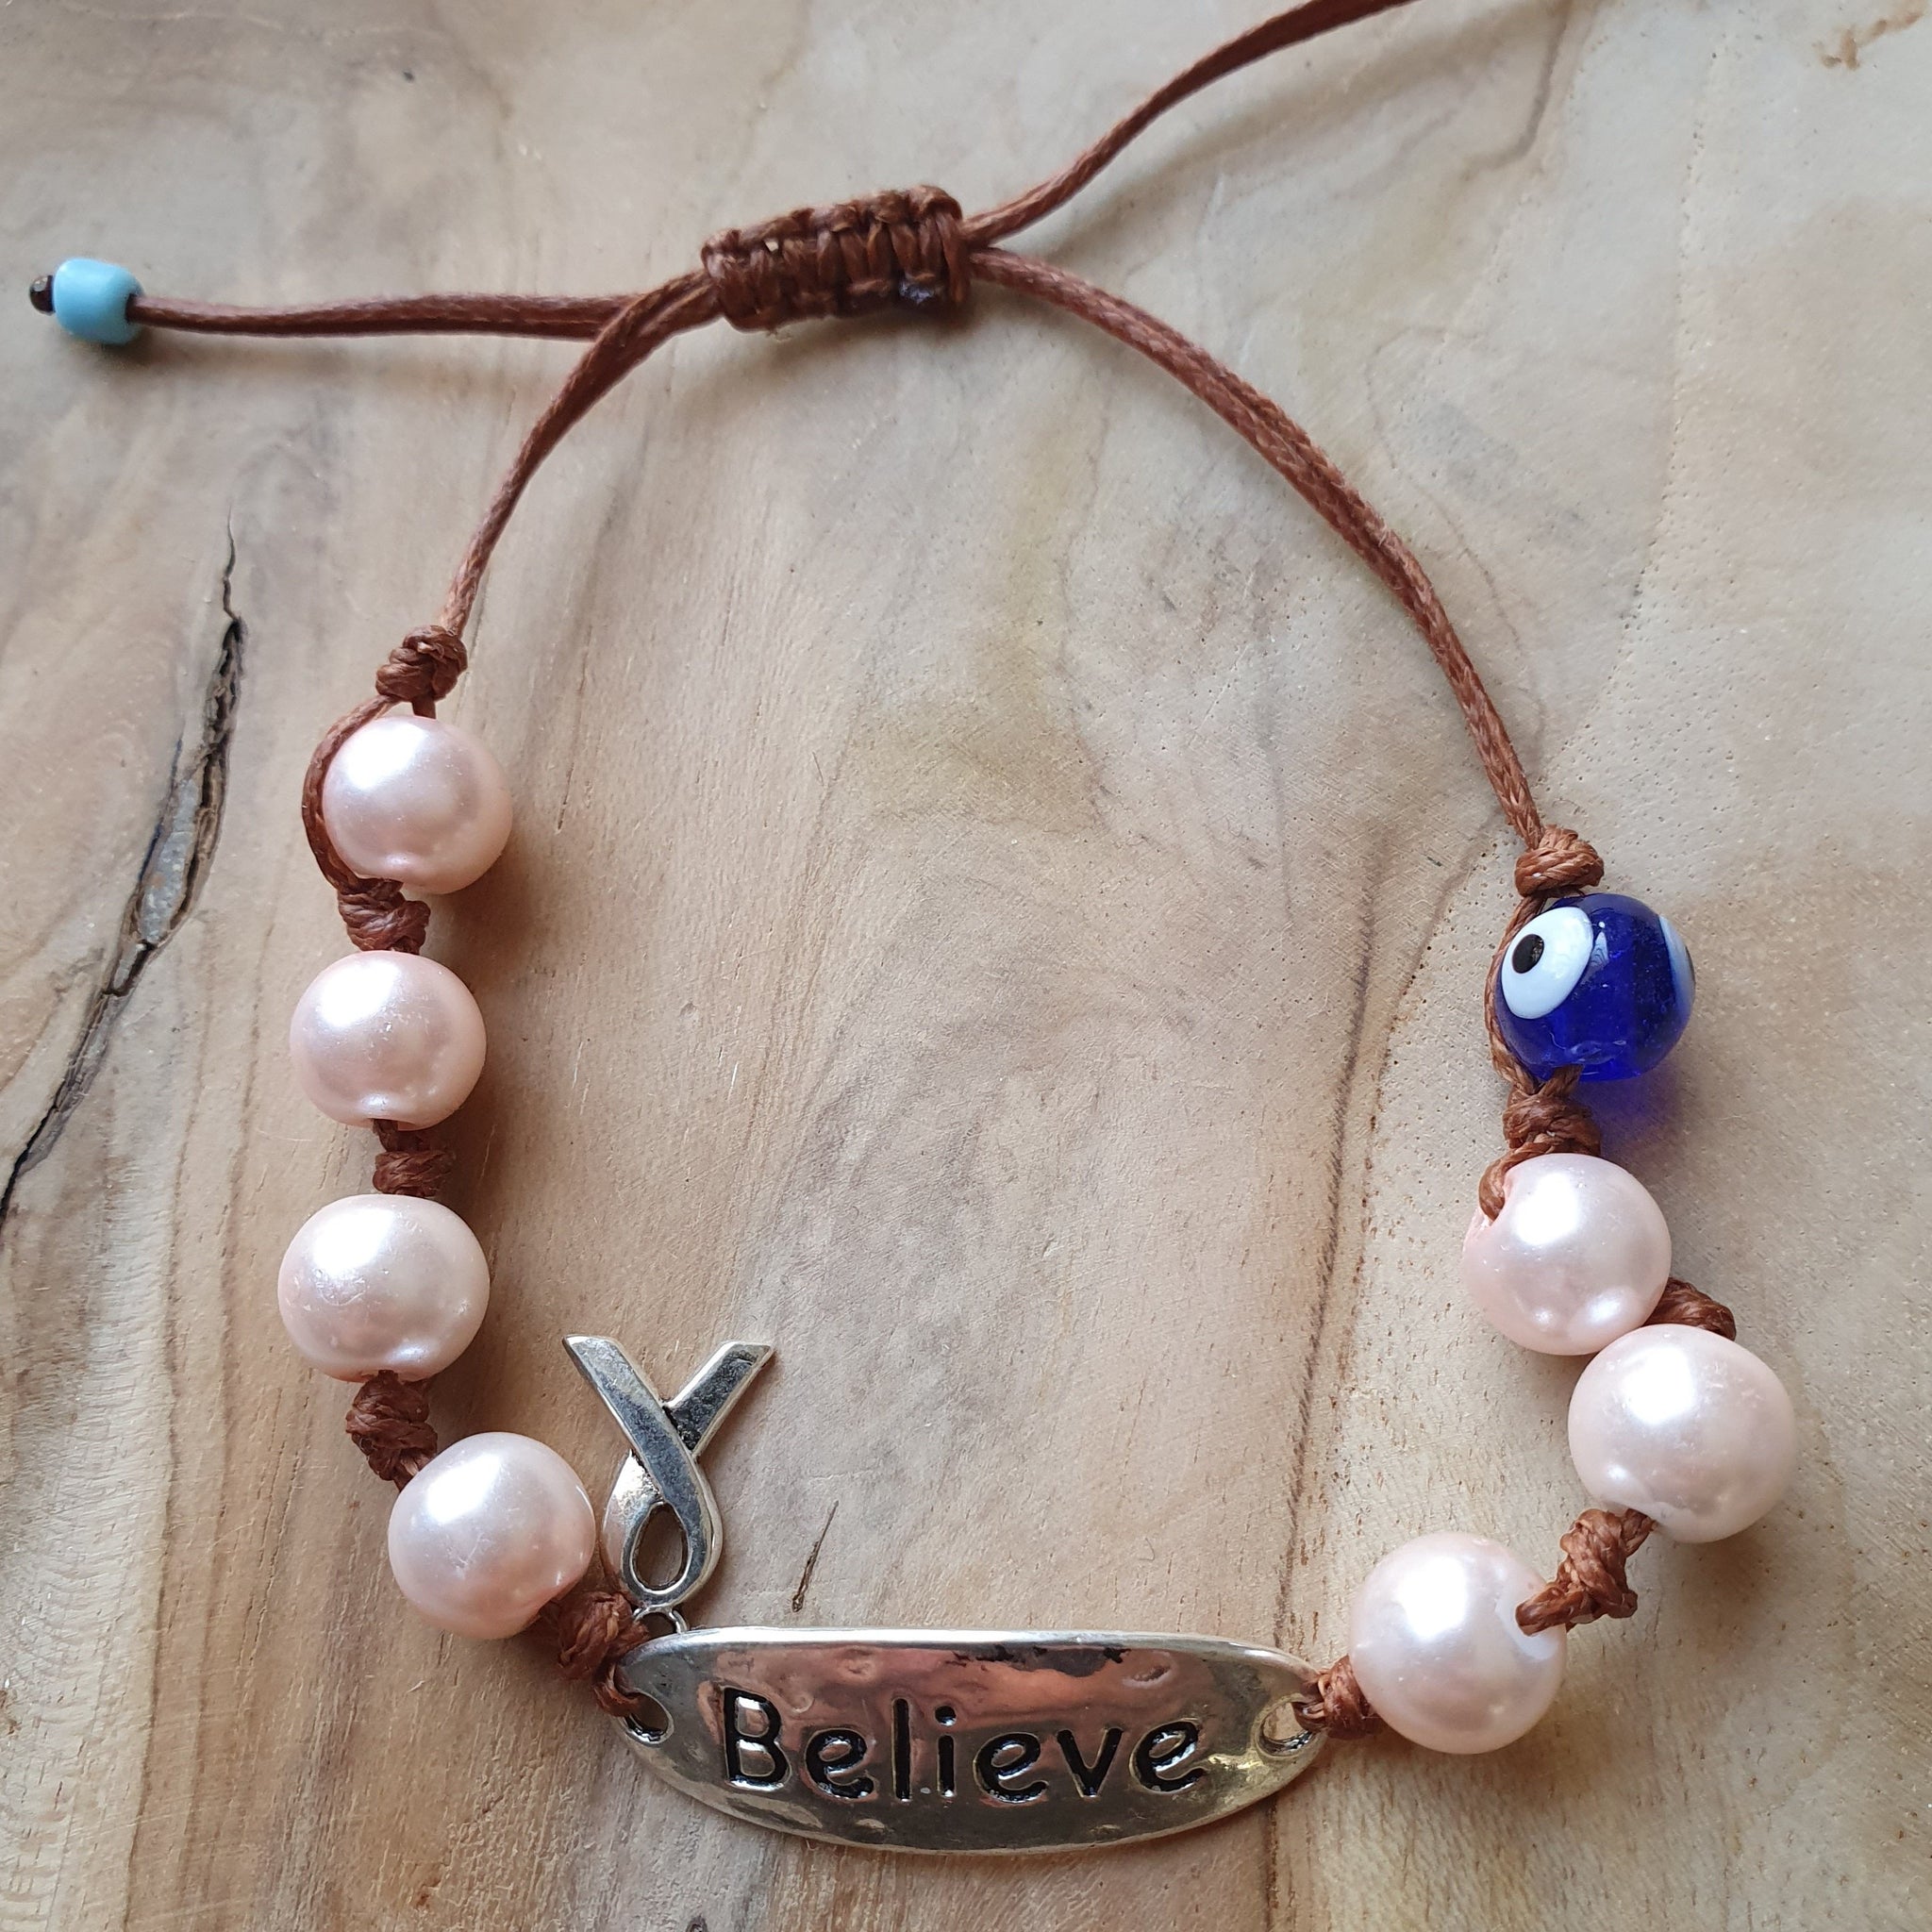 Ladies Believe bracelet with pearl beads and cancer ribbon